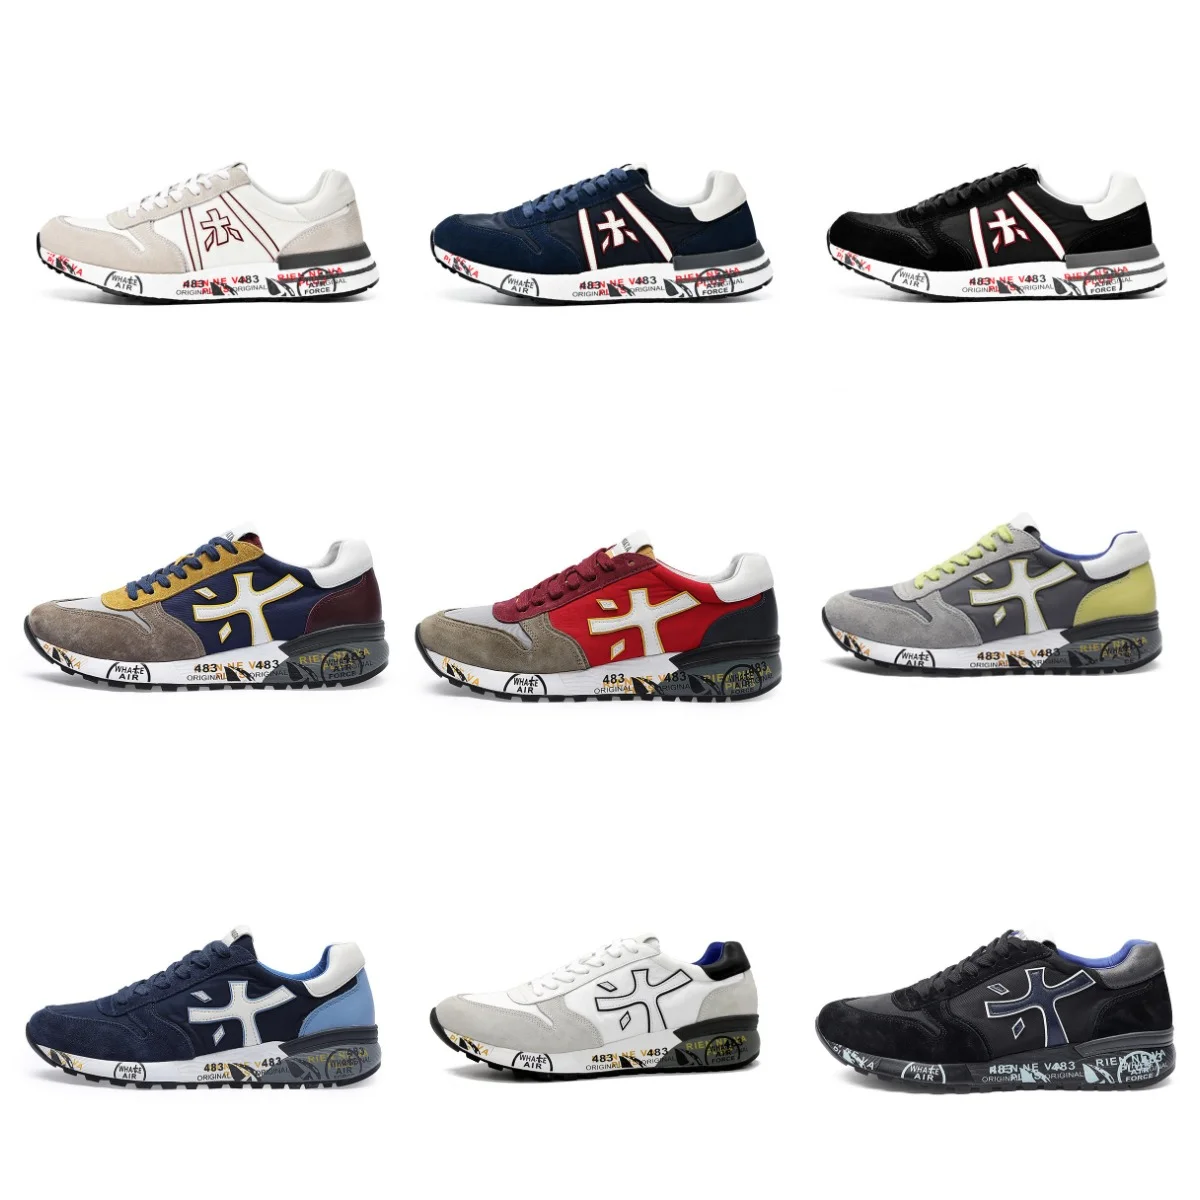 

Original Men PREMIATA Shoes Fashion Lightning Skateboard Breathable Casual Trainers Student Couple Outdoor Sneakers Eur 40-45